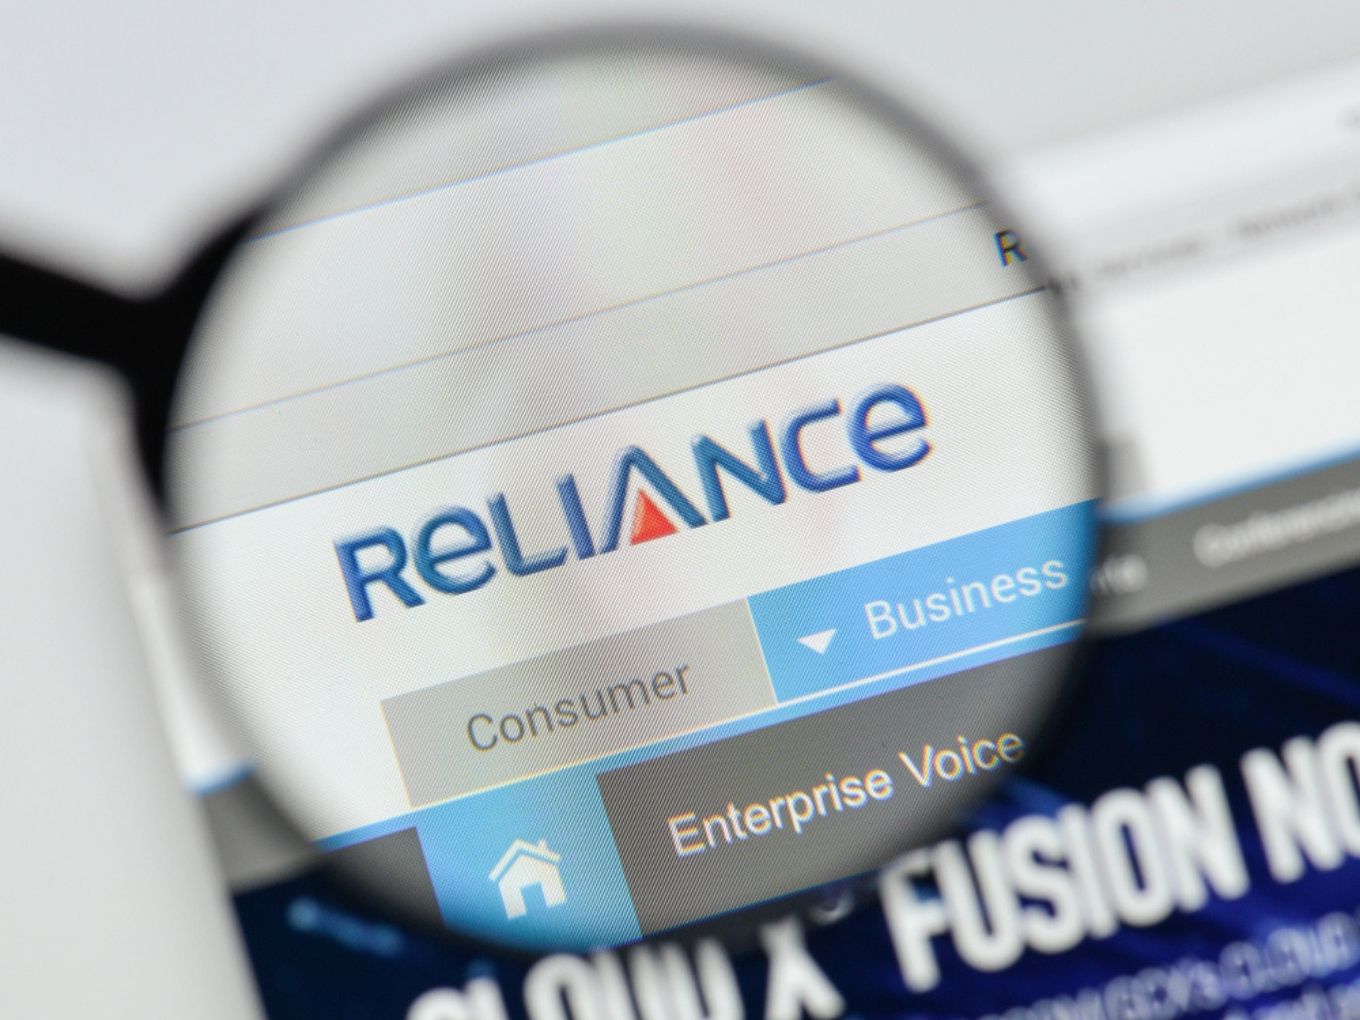 Reliance Might Launch Ecommerce Venture Around Diwali With Kirana Stores Onboard